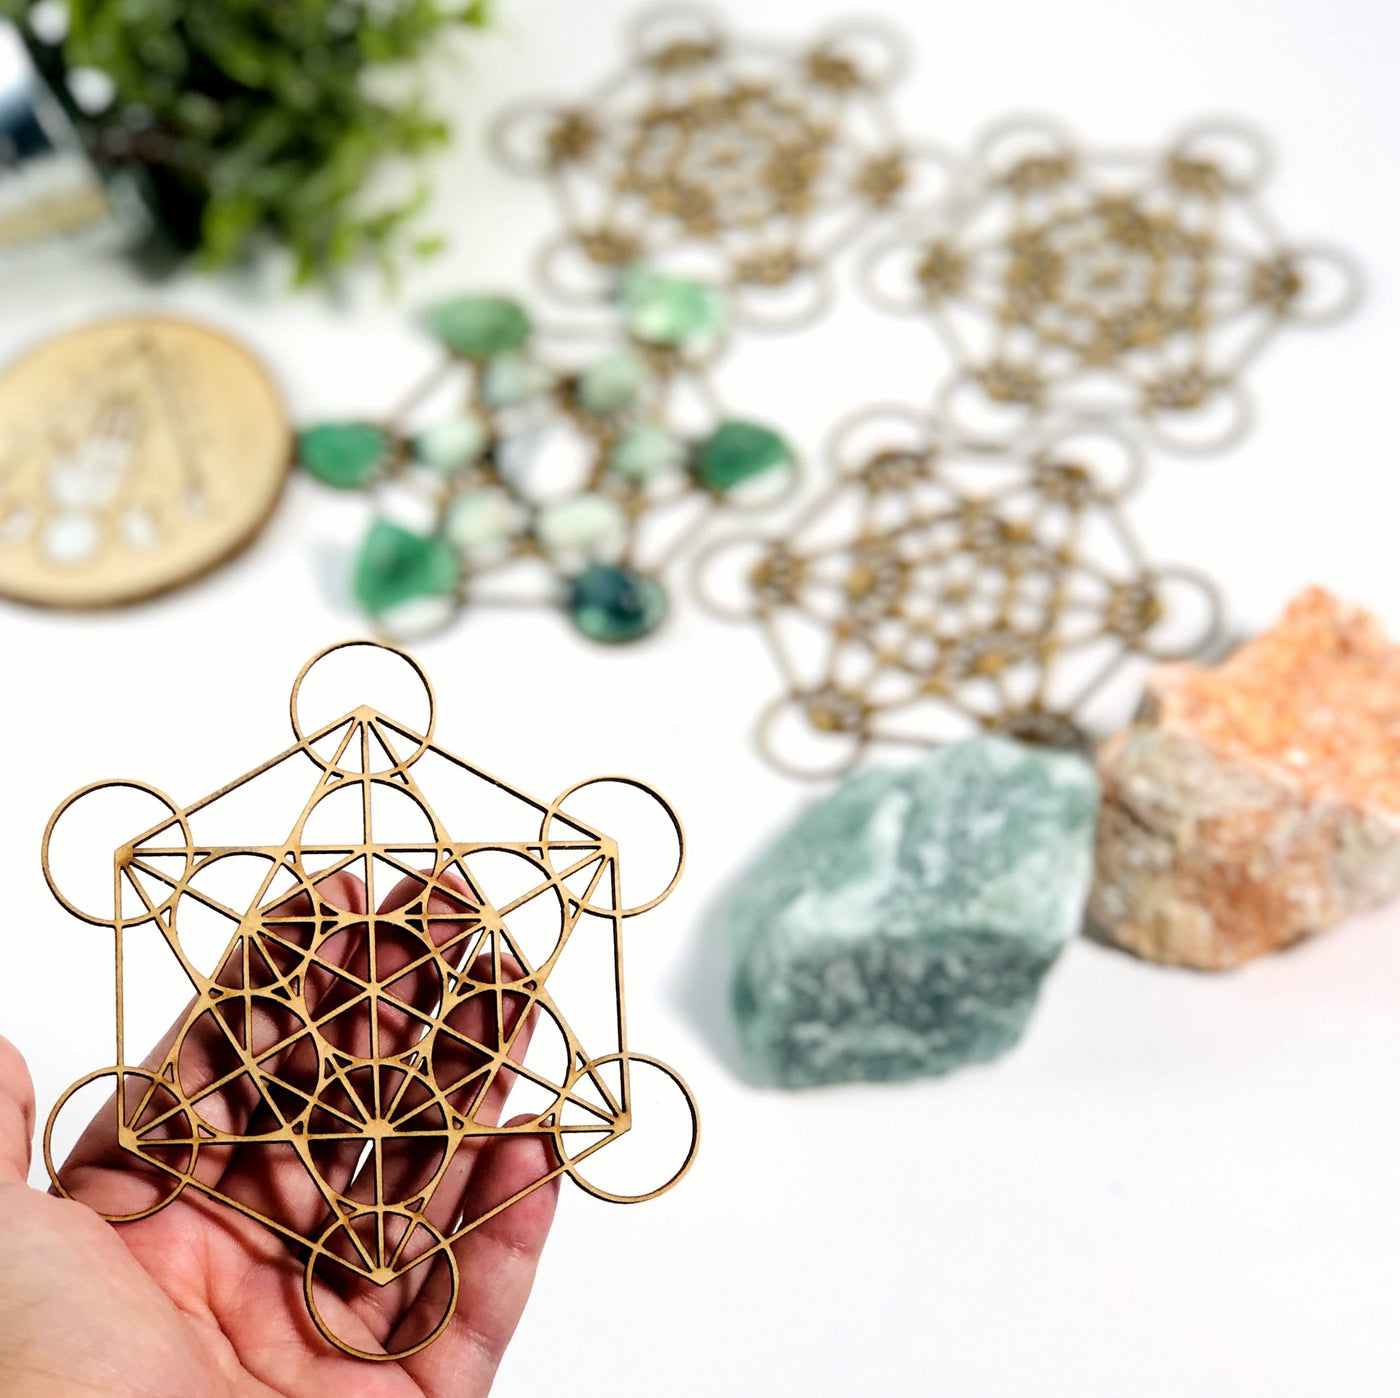 hand holding up metatron crystal grid with others blurred in the background with decorations